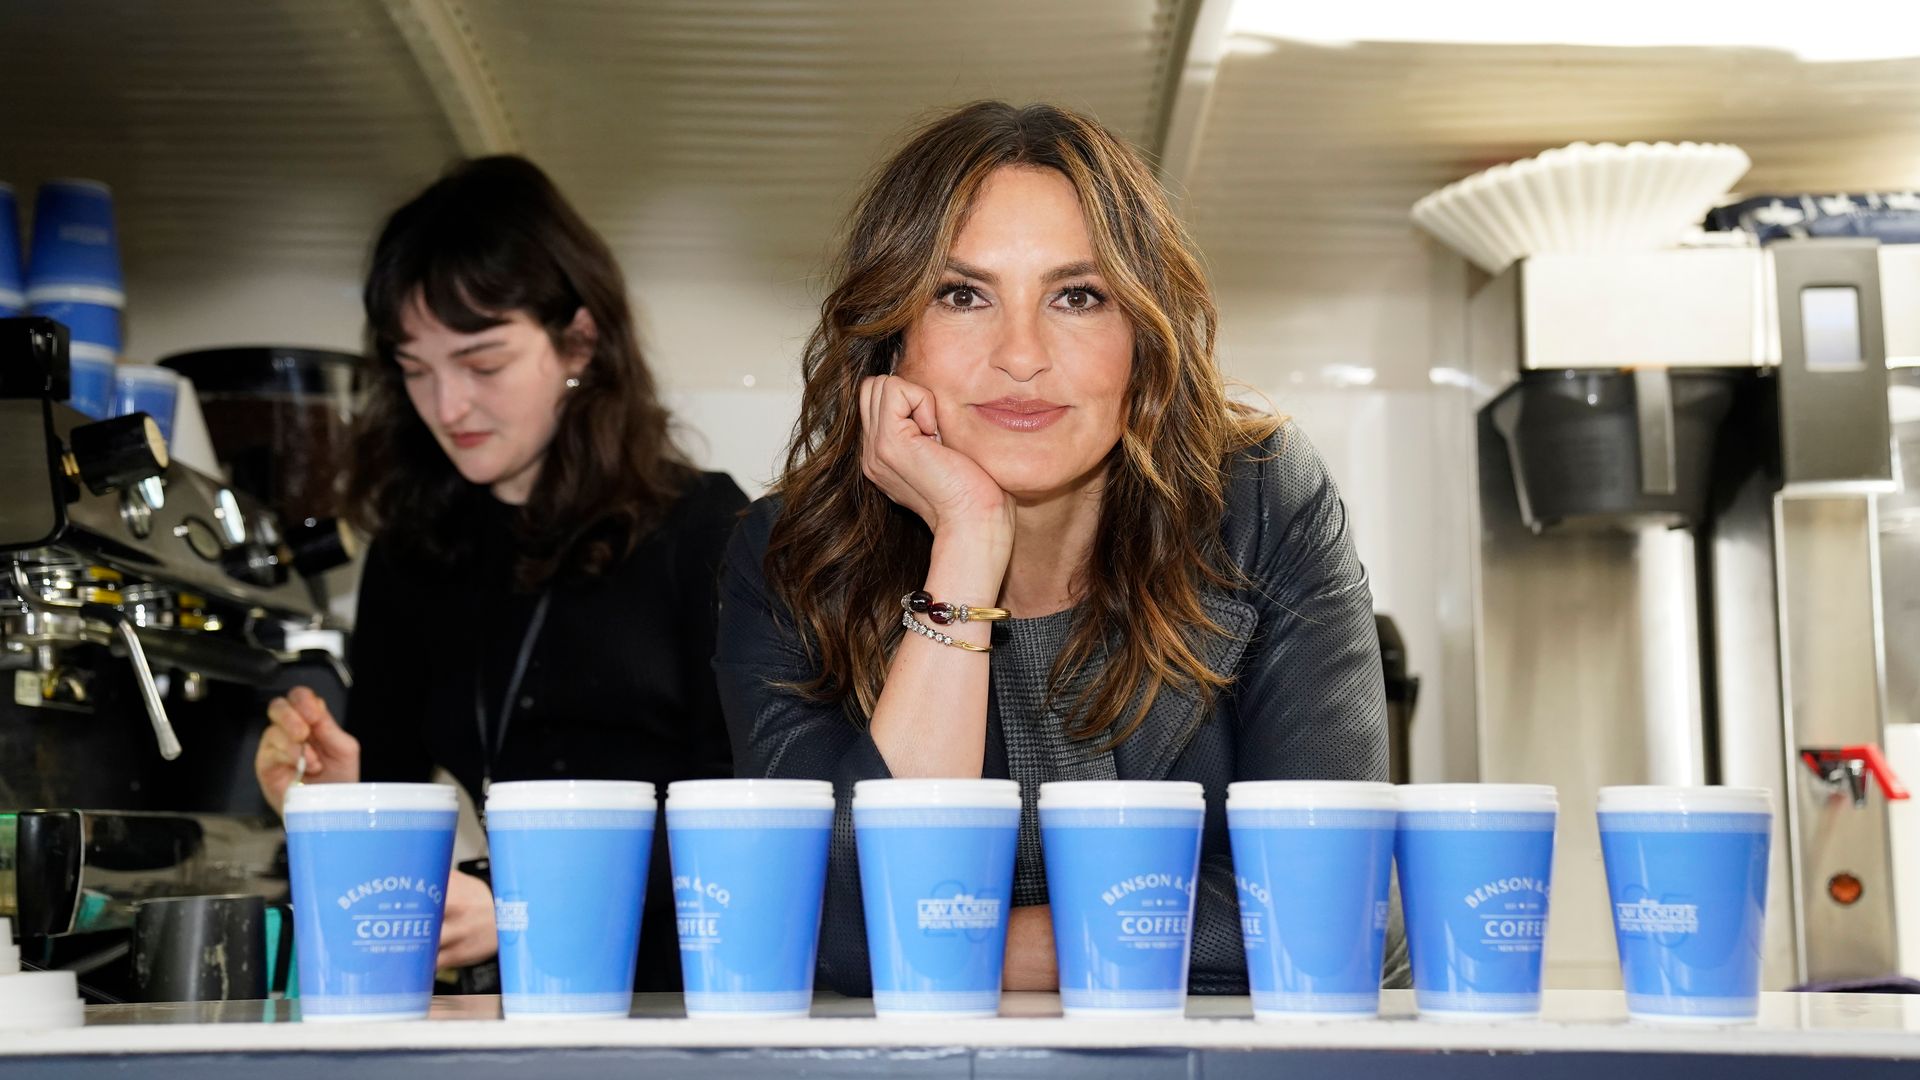 LAW & ORDER: SPECIAL VICTIMS UNIT -- Rockefeller Plaza Fan Event -- Pictured: Mariska Hargitay at Rockefeller Plaza on Friday, March 15, 2024 -- (Photo by: Ralph Bavaro/NBC via Getty Images)